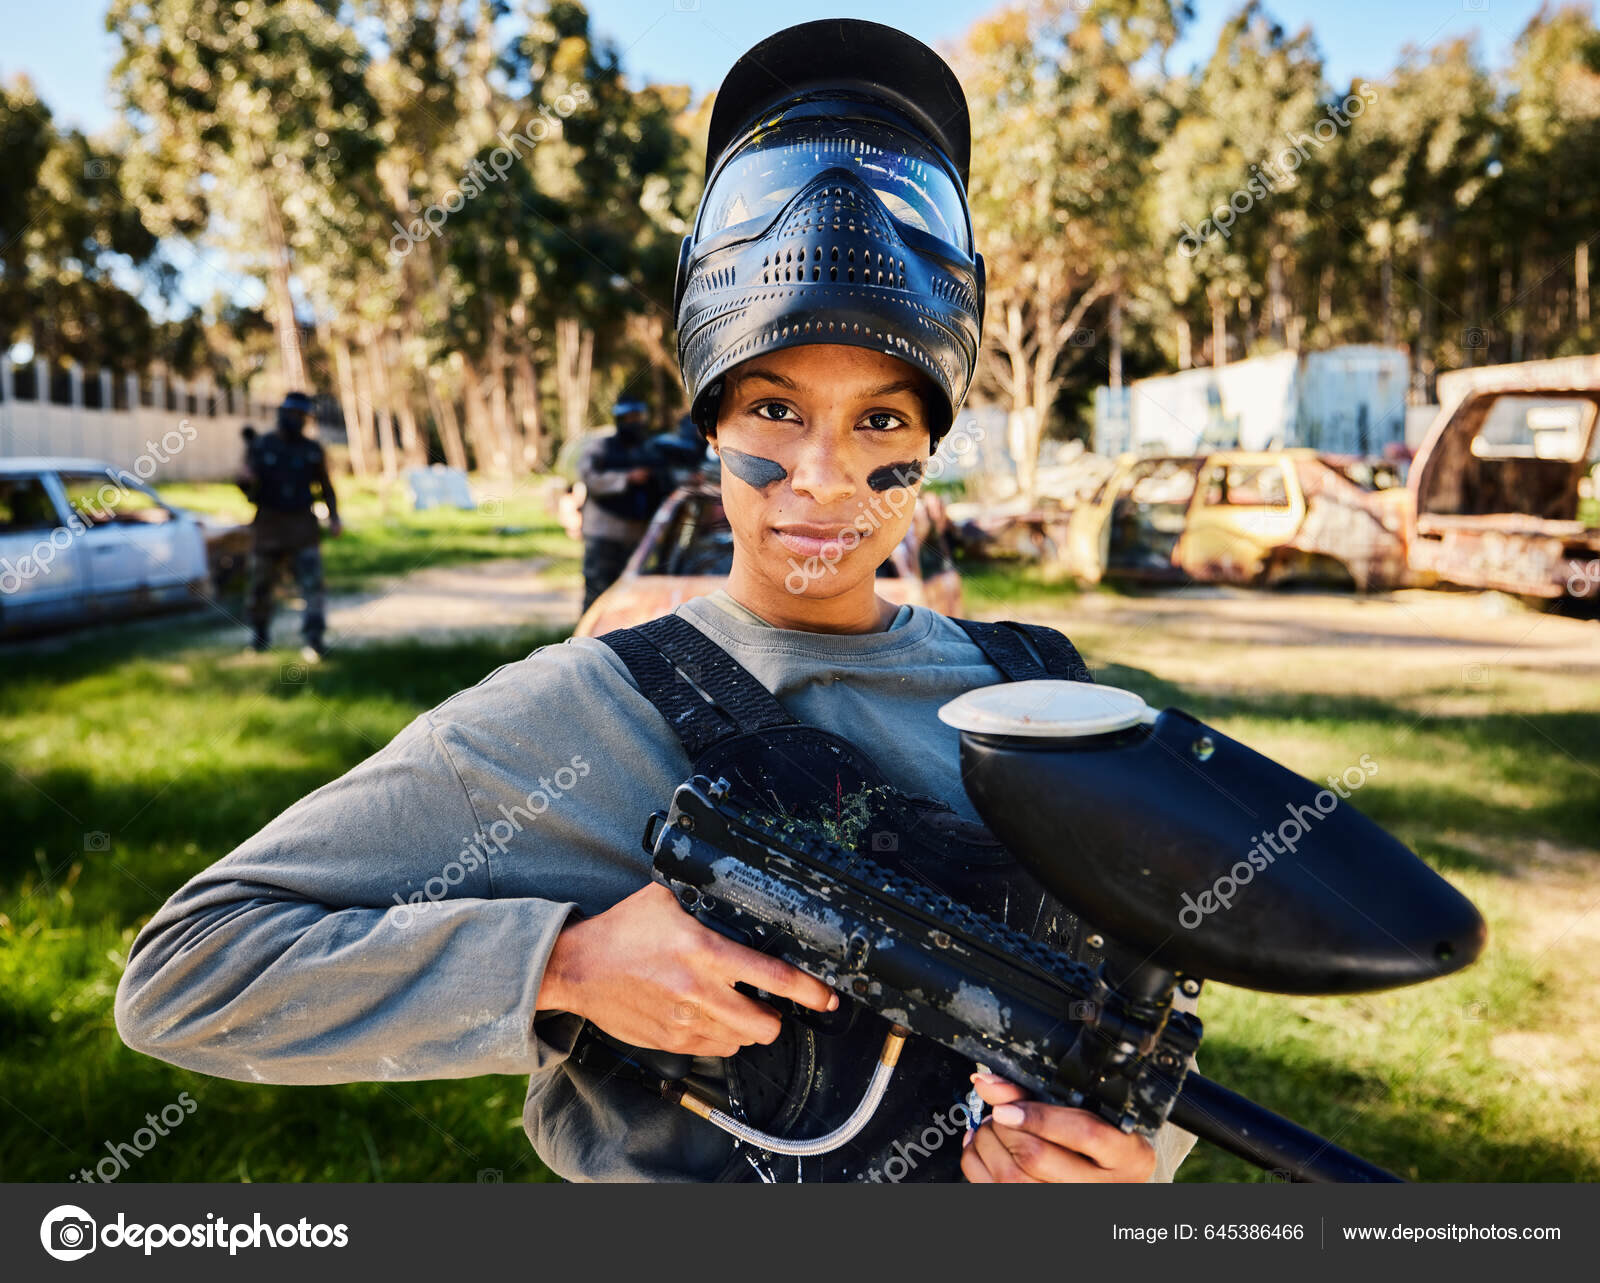 Paintball Serious Portrait Woman Gun Shooting Game Playing Action Battlefield Stock Photo by ©PeopleImages 645386466